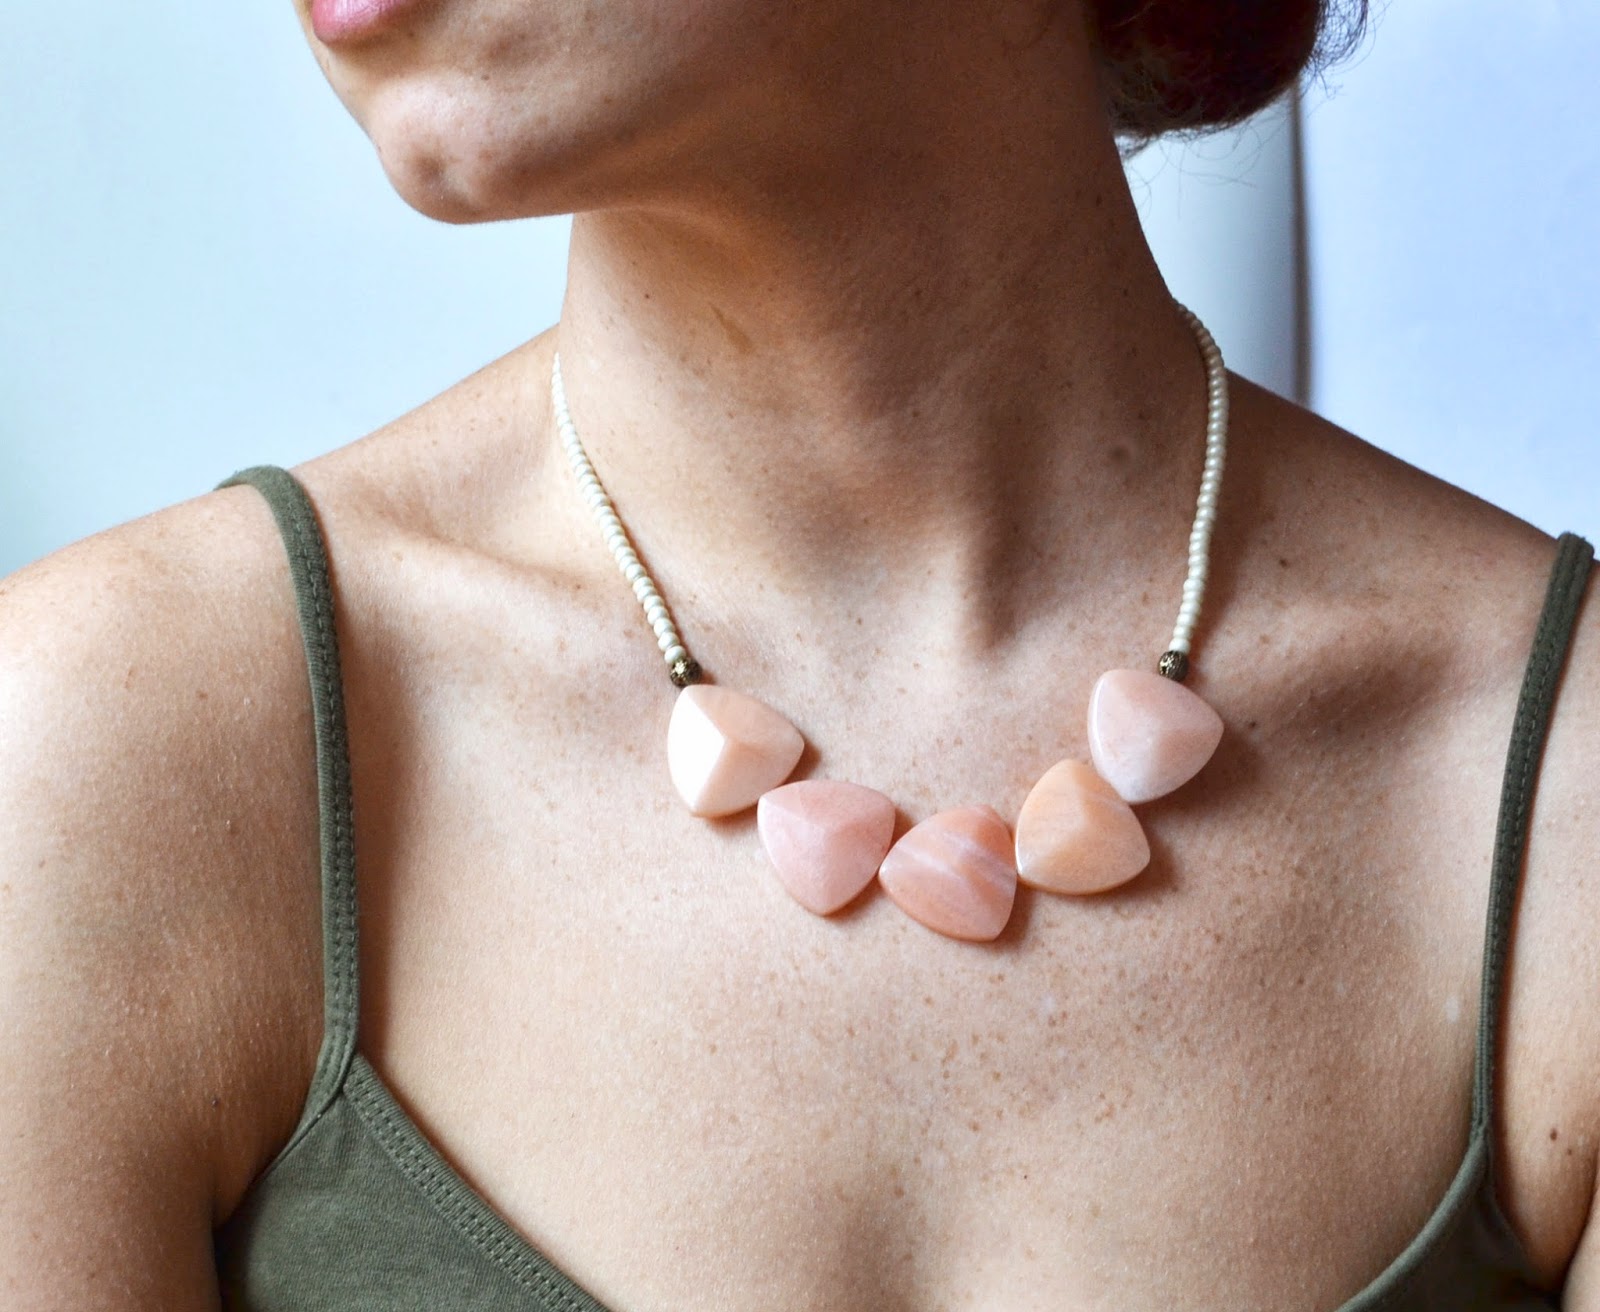 http://www.storenvy.com/products/6075610-aventurine-stone-necklace-statement-necklace-summer-jewelry-peach